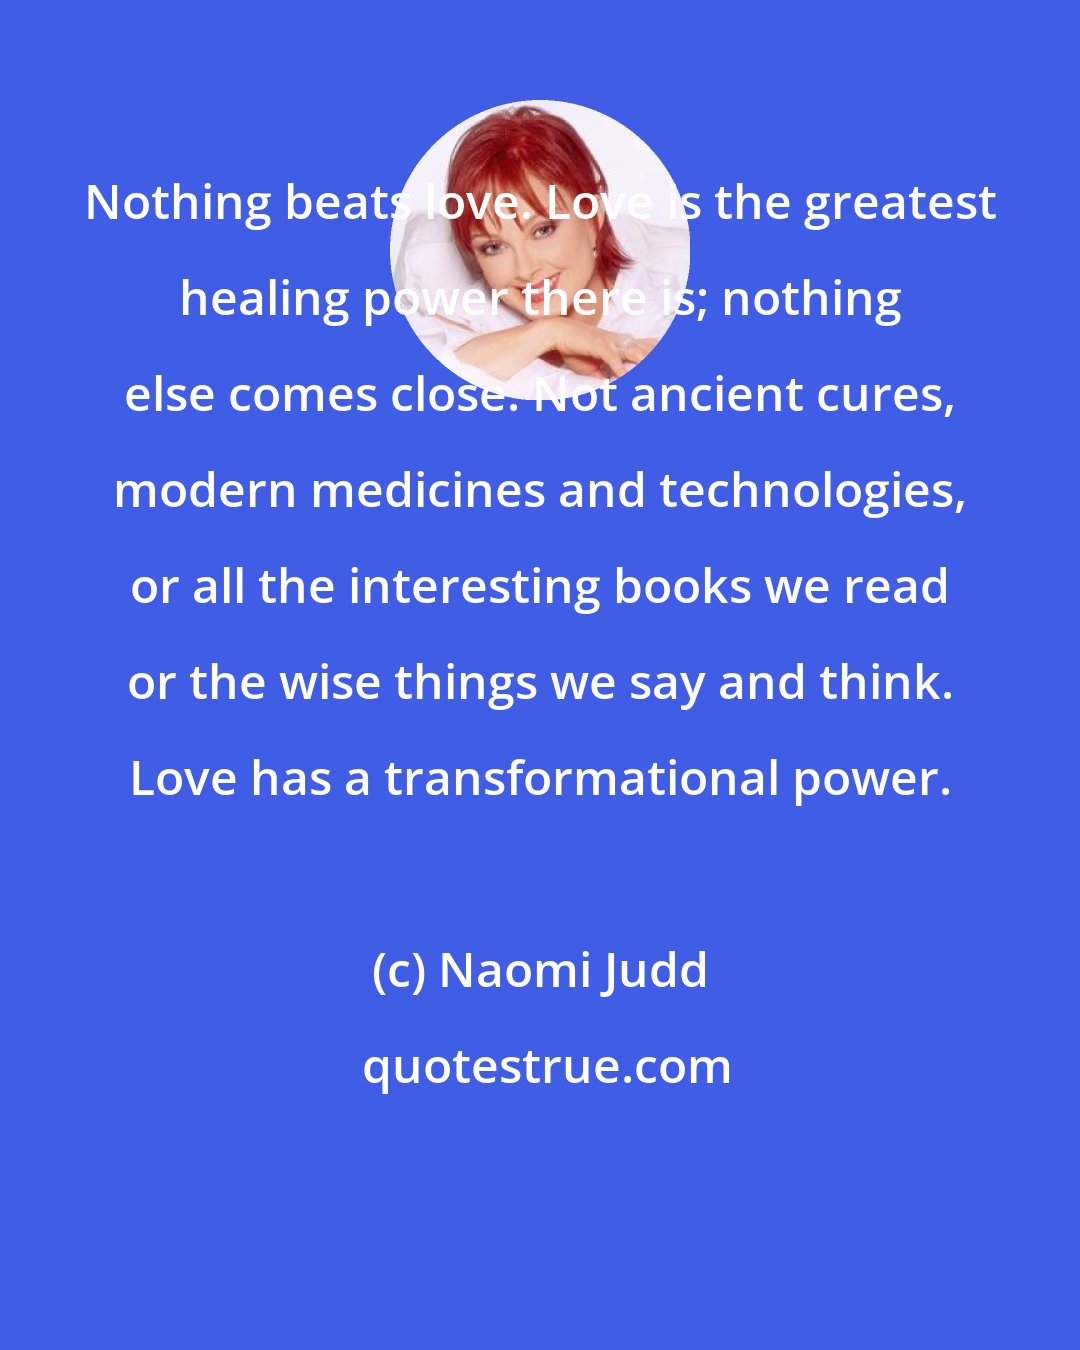 Naomi Judd: Nothing beats love. Love is the greatest healing power there is; nothing else comes close. Not ancient cures, modern medicines and technologies, or all the interesting books we read or the wise things we say and think. Love has a transformational power.